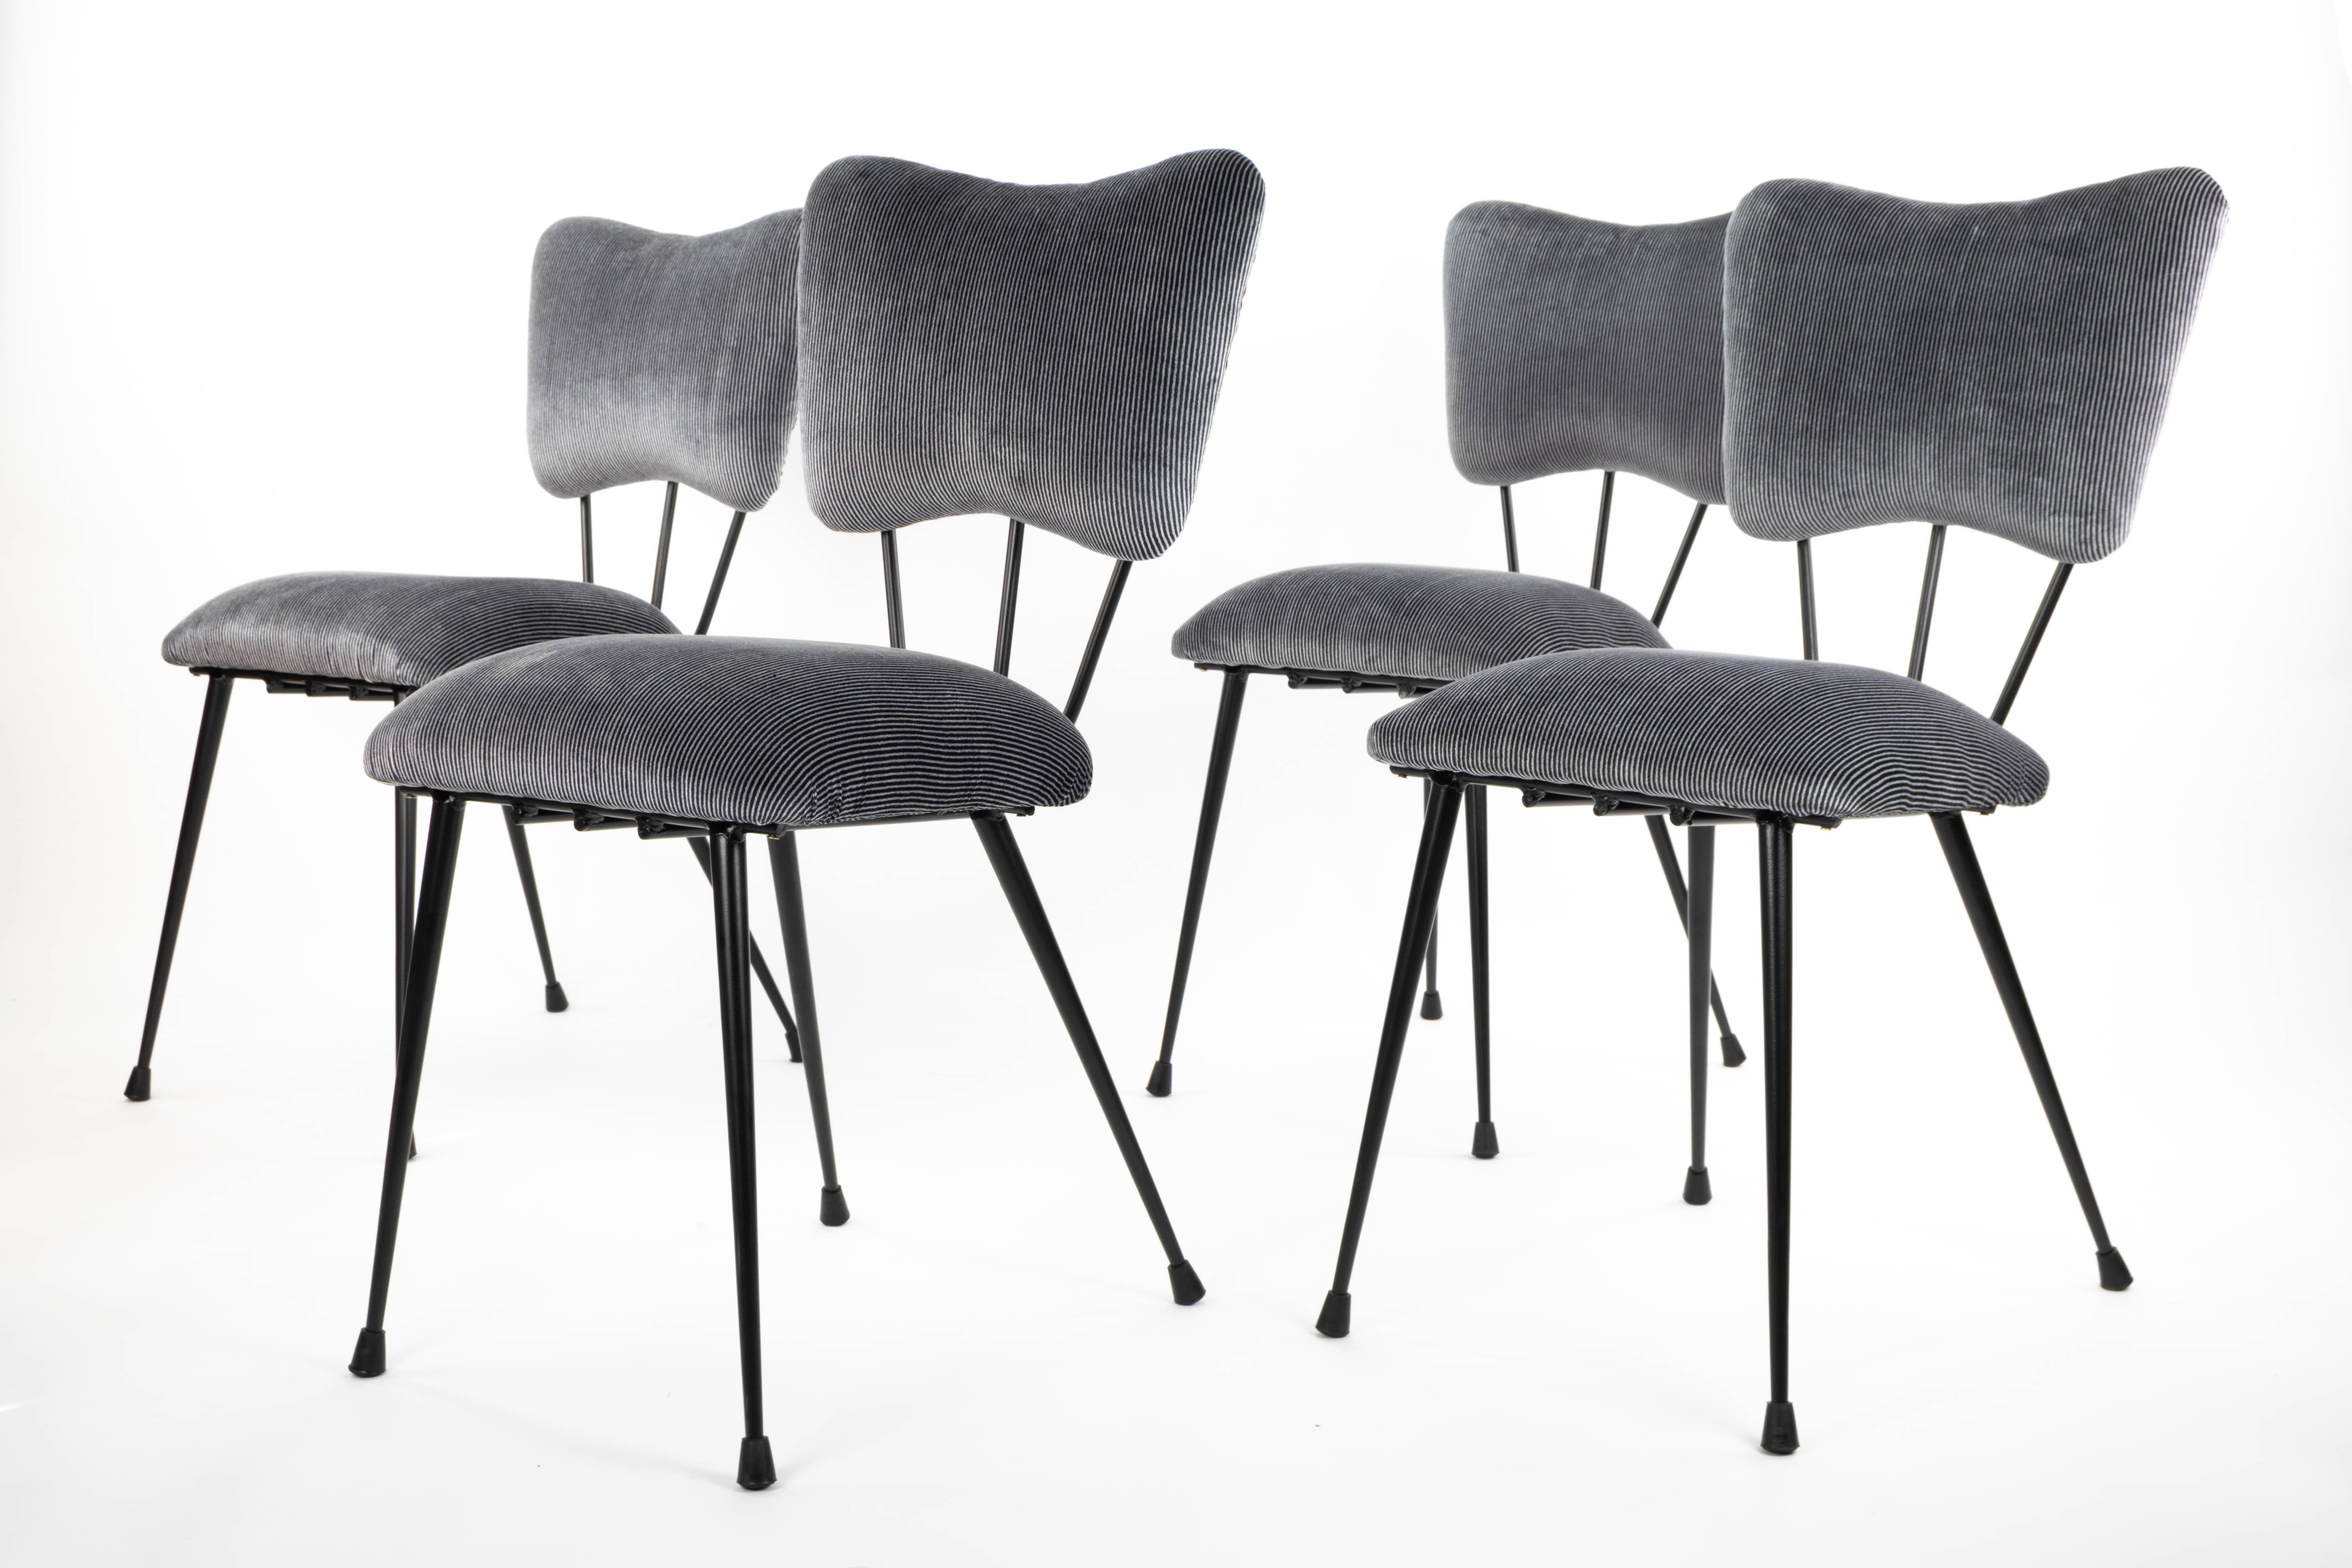 Mid-20th Century Midcentury French Chairs in Black Lacquered Steel and Striped Upholstery, 1950s